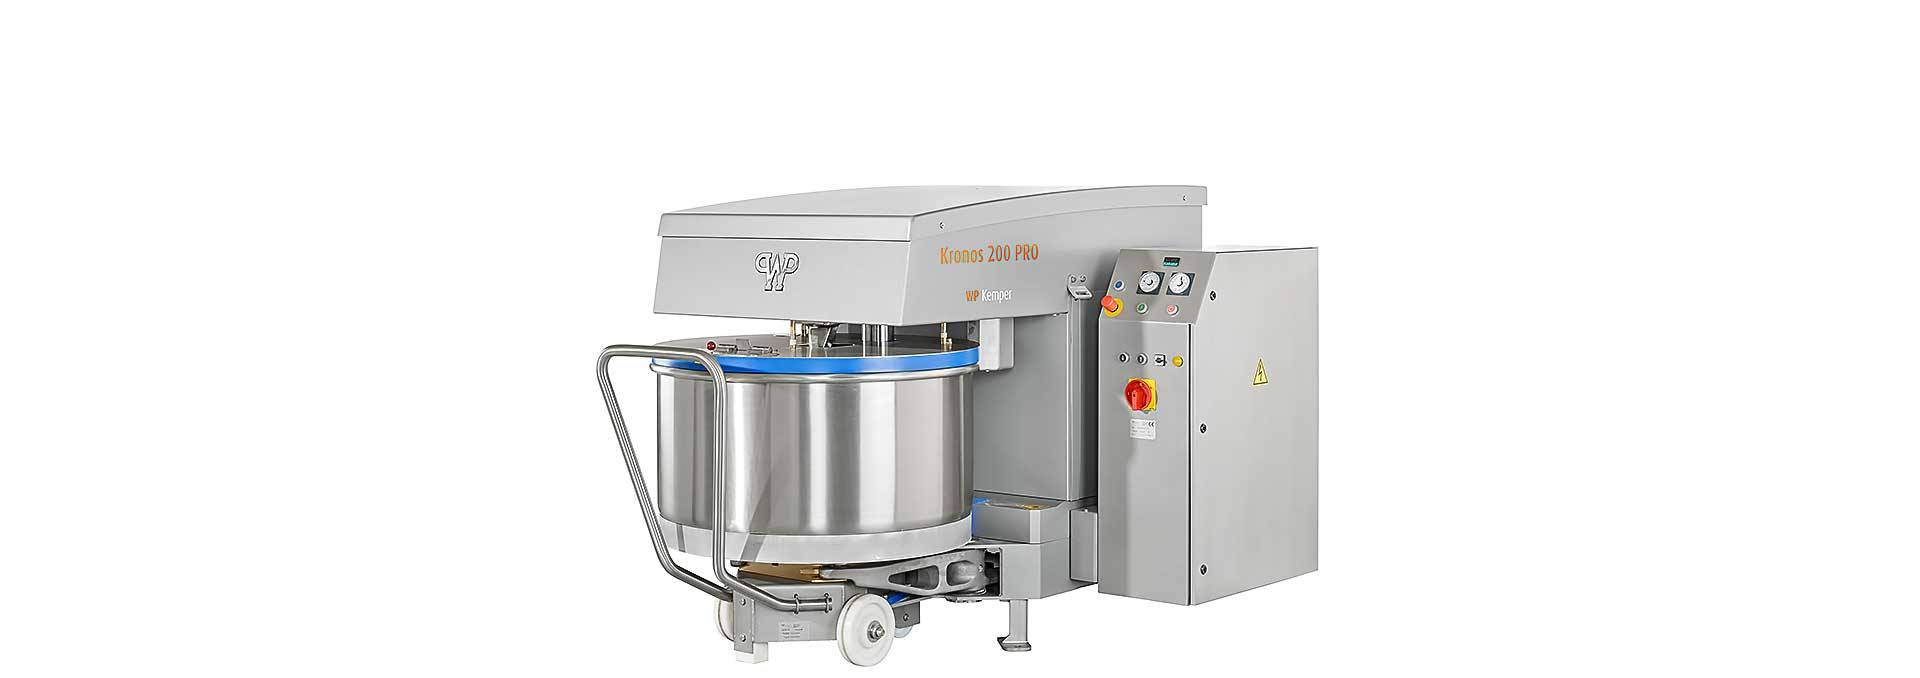 WP Kemper Kronos Spiral Mixer | WP Bakery Group USA, Retail, Wholesale, Commercial Bakery Equipment and Industrial Bakery Equipment, Shelton, CT USA